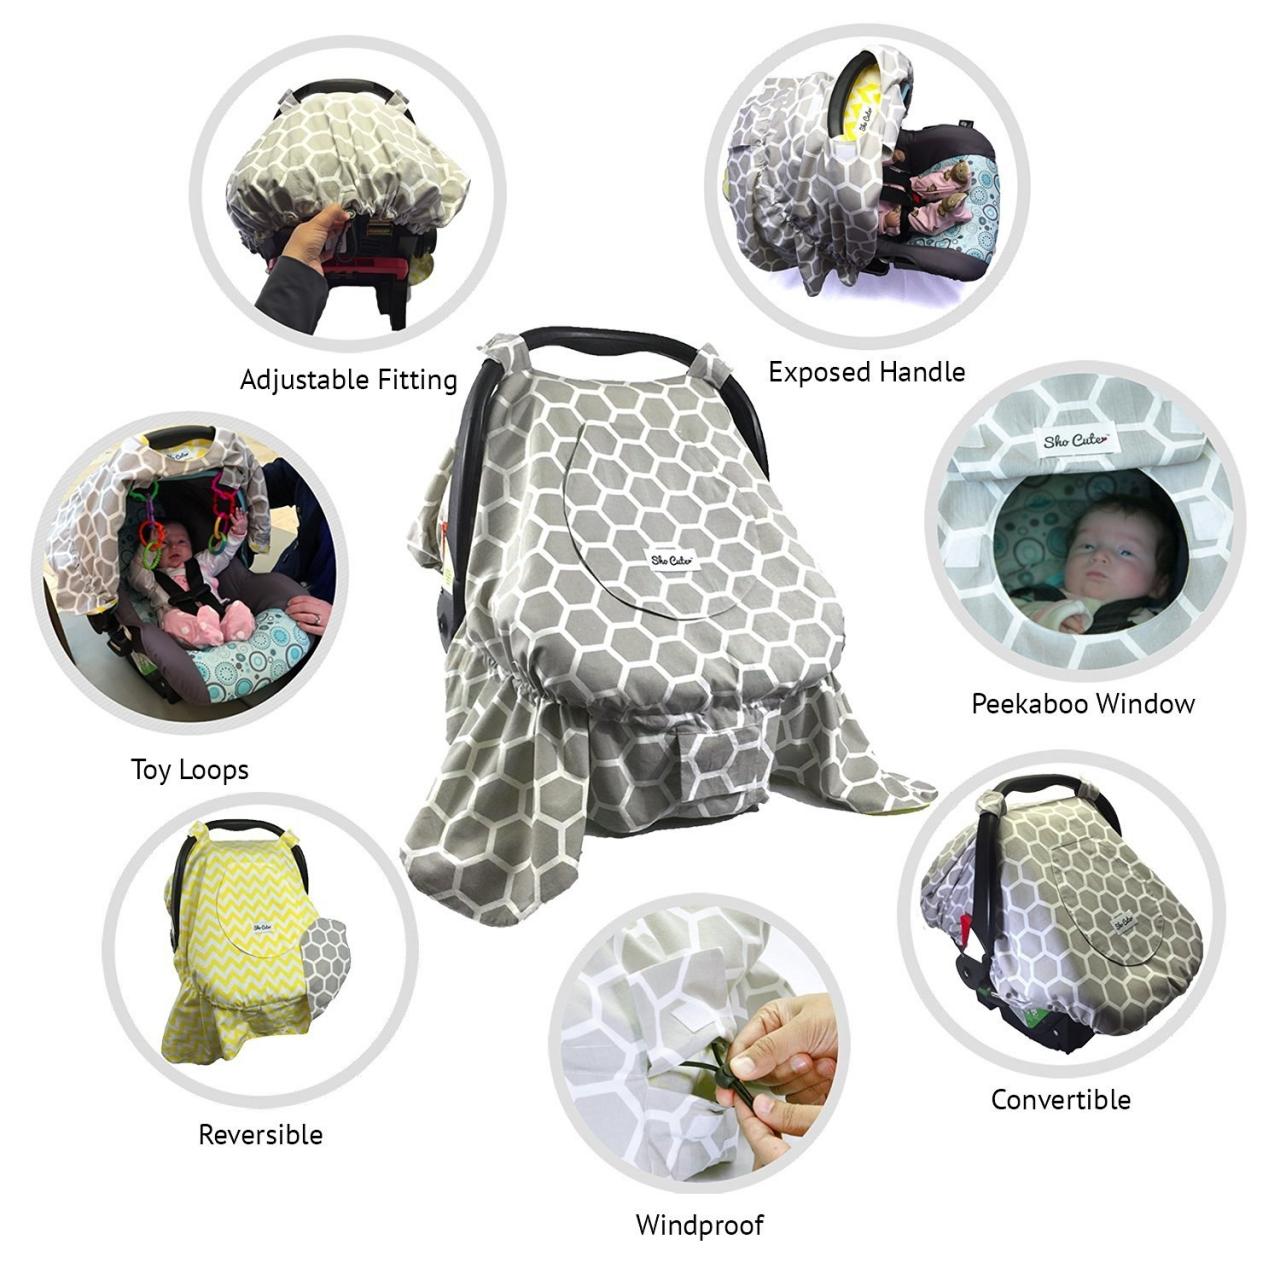 Sho Cute - The Cute Cocoon [Reversible] - Baby Car Seat Covers, Windproof,  Peekaboo Window, Universal Fit, Grey & Yellow, Infant Carseat Canopy | Baby  Gift Boy or Girl - Patent Pending